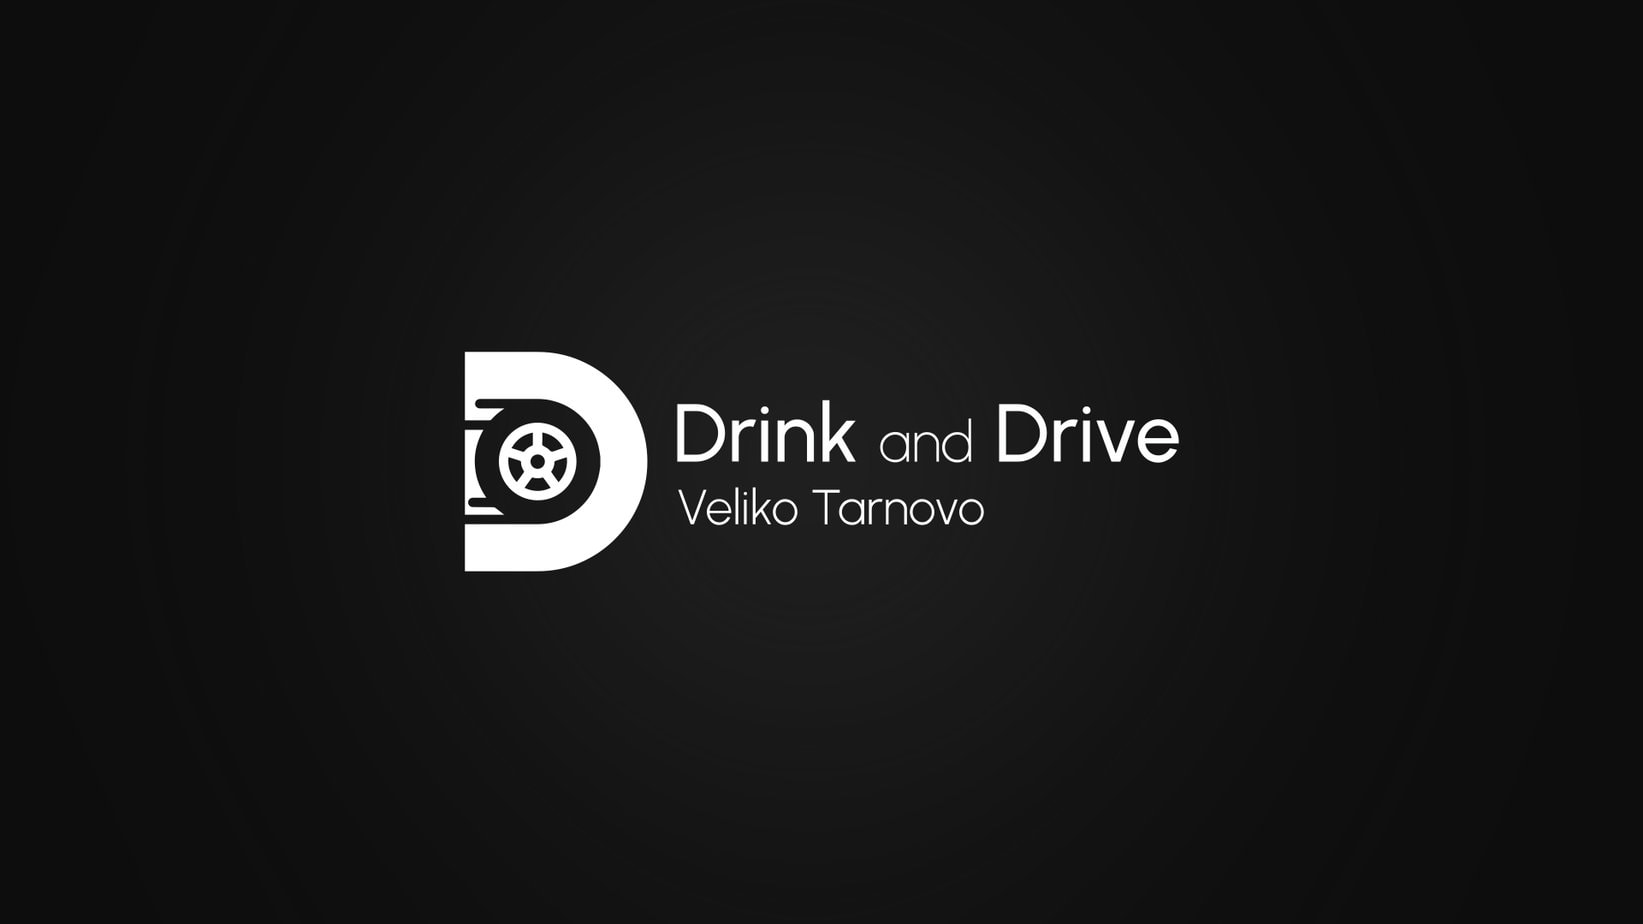 logo-drink-and-drive-design-by-newwwdesign